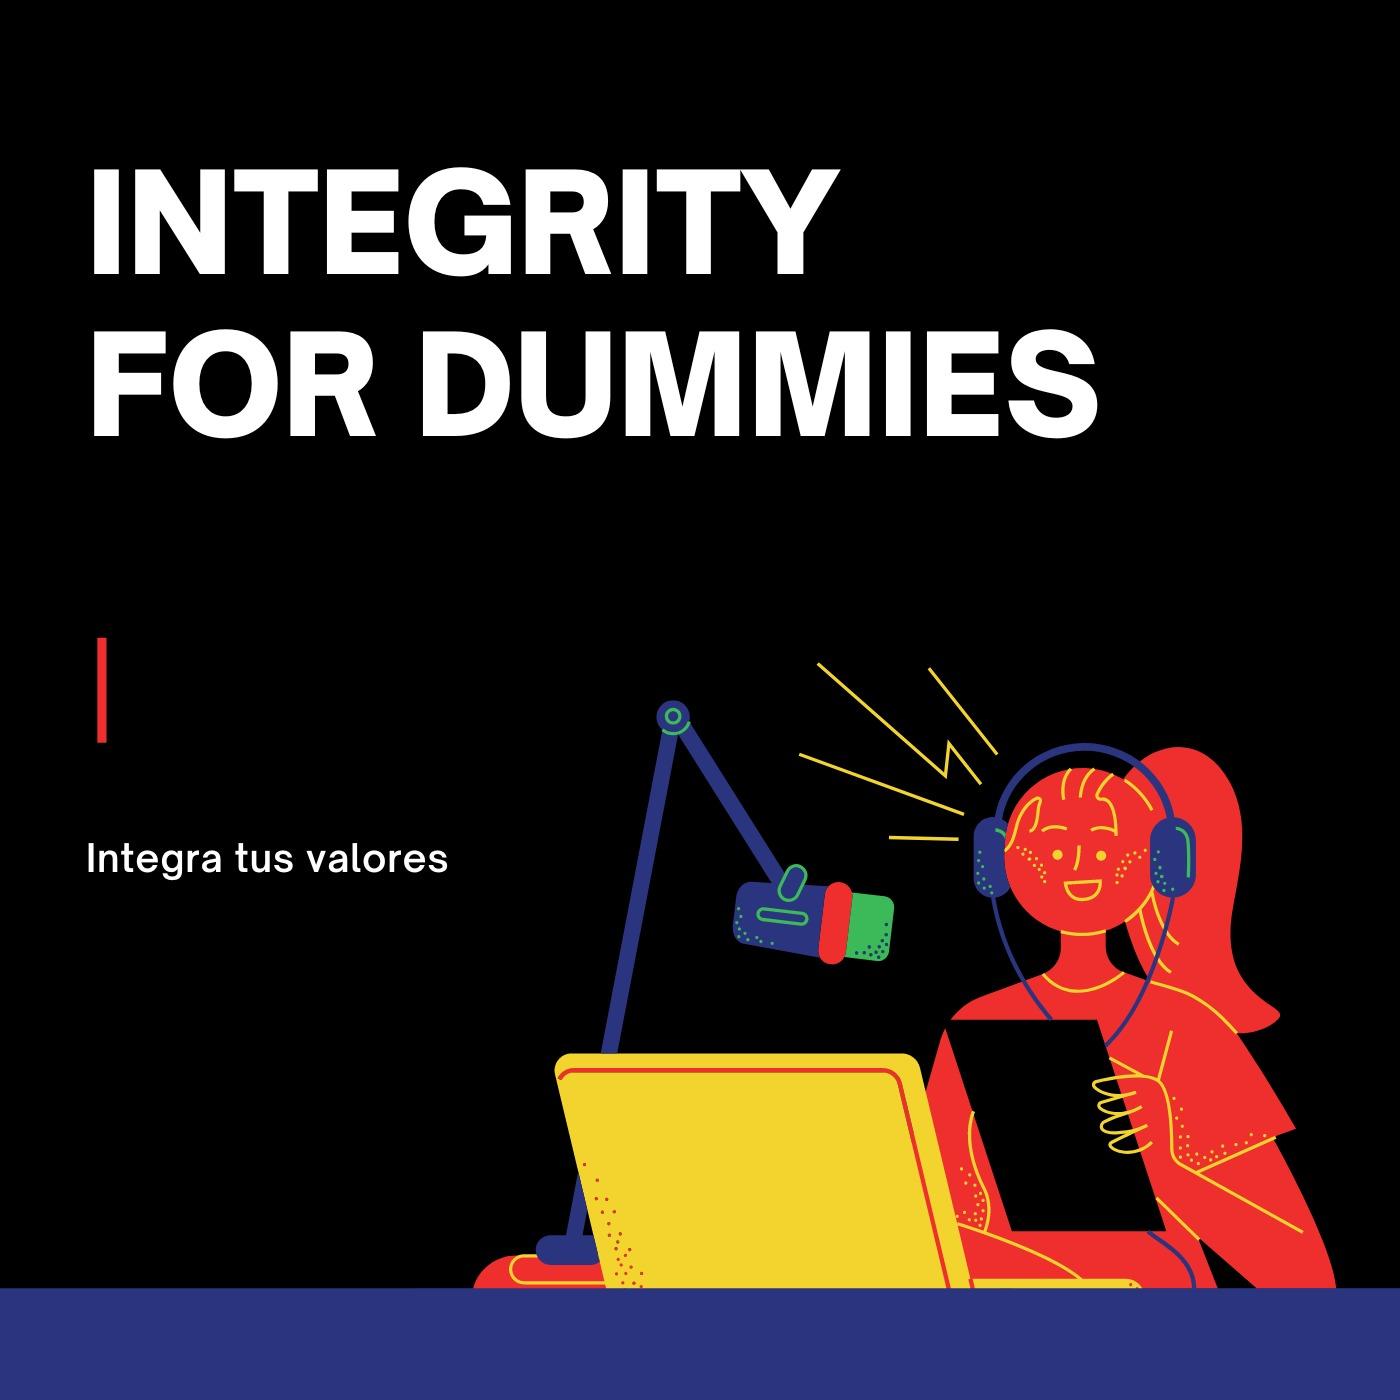 Integrity for dummies